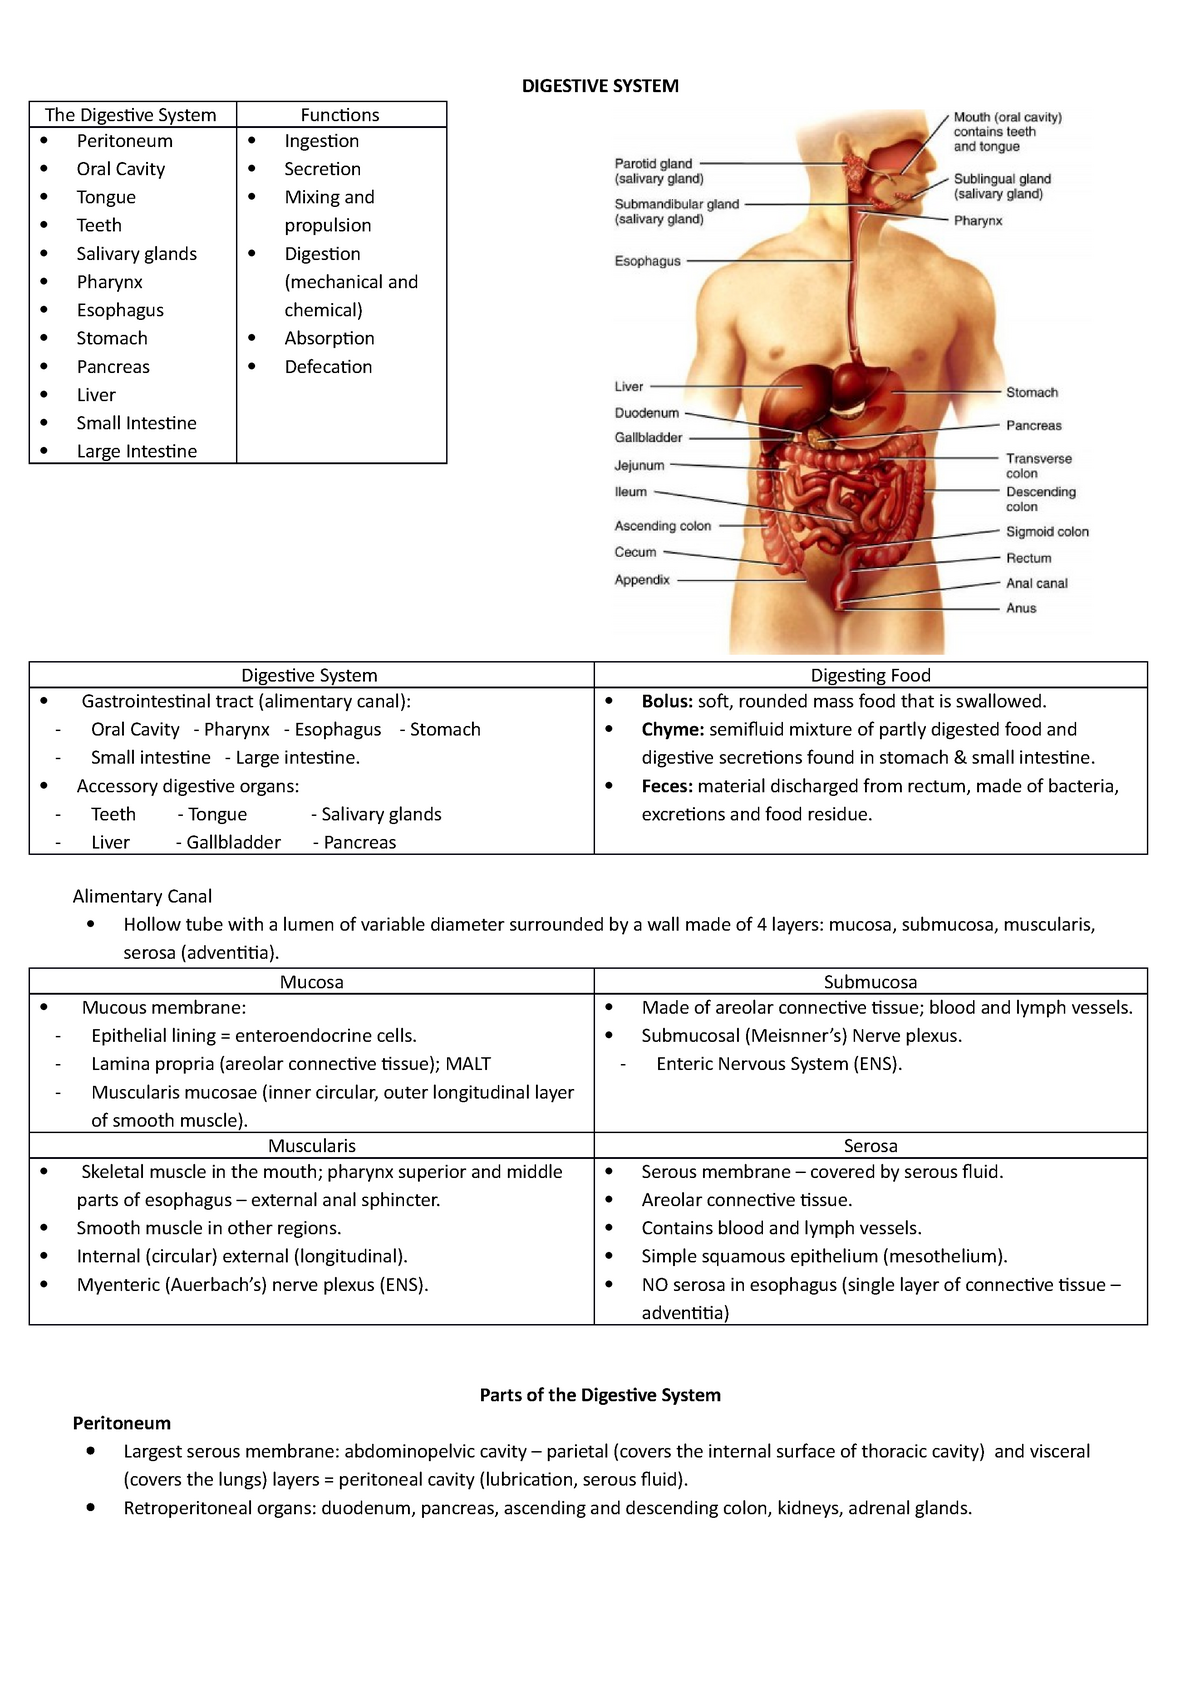 Digestive System - Summary notes - DIGESTIVE SYSTEM The Digestive ...